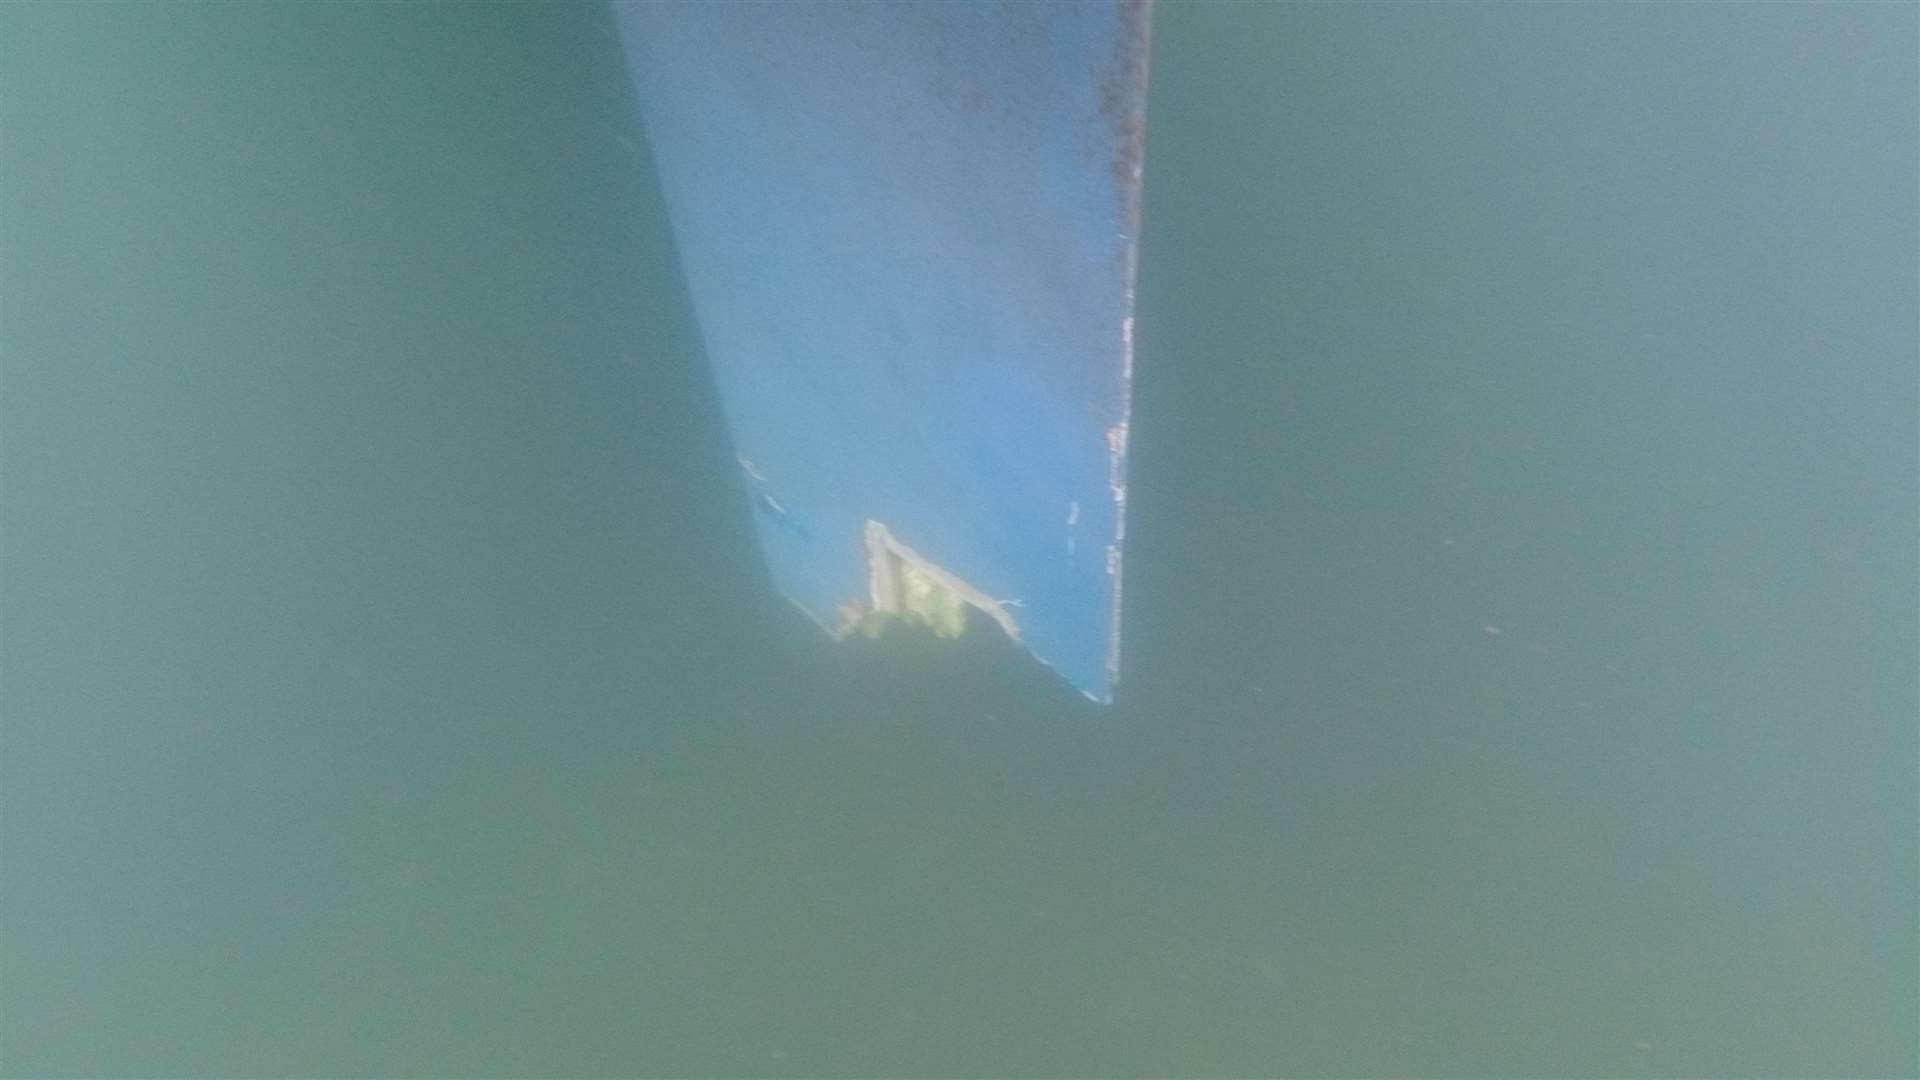 A chunk of the rudder was bitten off. Picture: SWNS